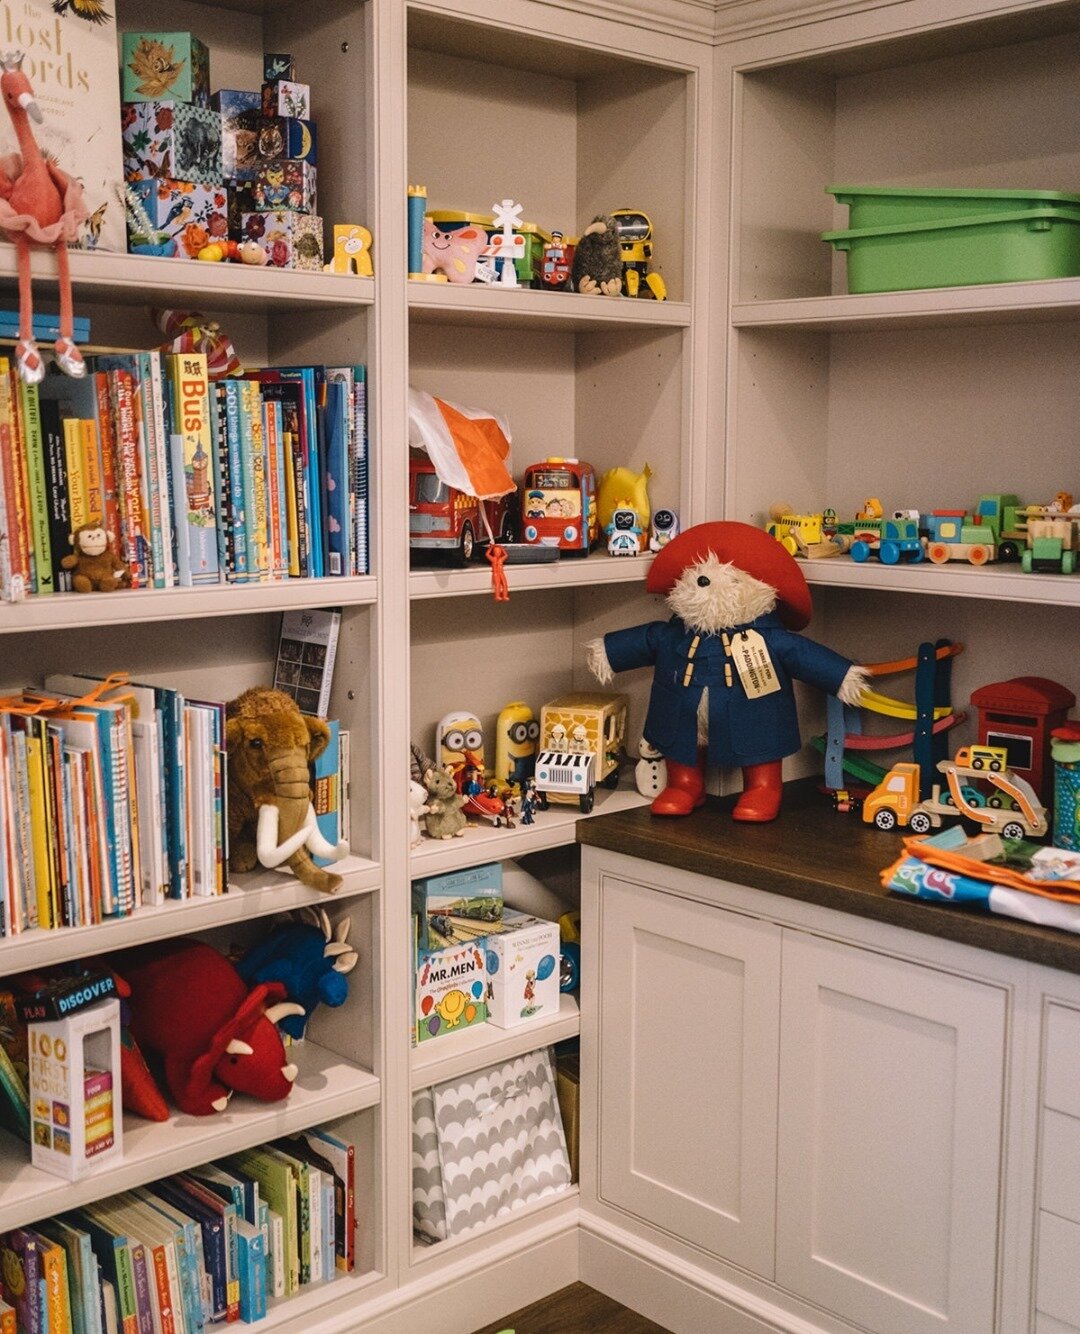 How to keep your happy during lockdown?⁠
Have a room dedicated to their toys and school work. ⁠
⁠
⁠
#dulwich #dulwichtownhouse #dulwichinteriordesign #dulwichhomedesign #dulwichstudy #dulwichinteriordesigner #homeoffice  #homeofficedesign  #luxuryhom